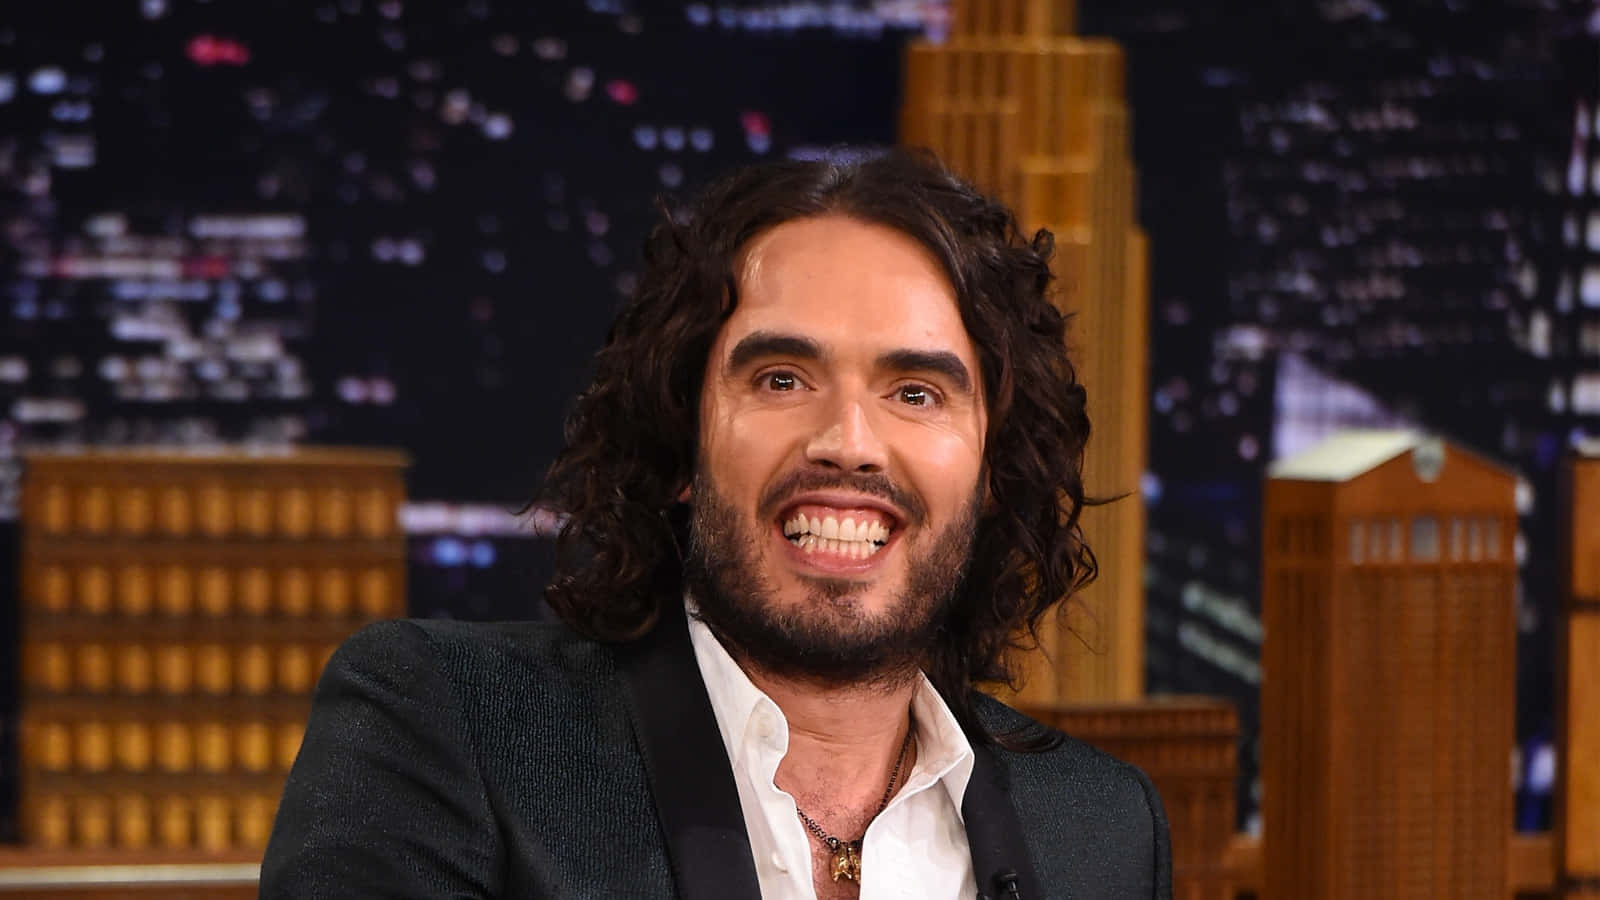 Comedian Russell Brand appearing on The Tonight Show. Wallpaper